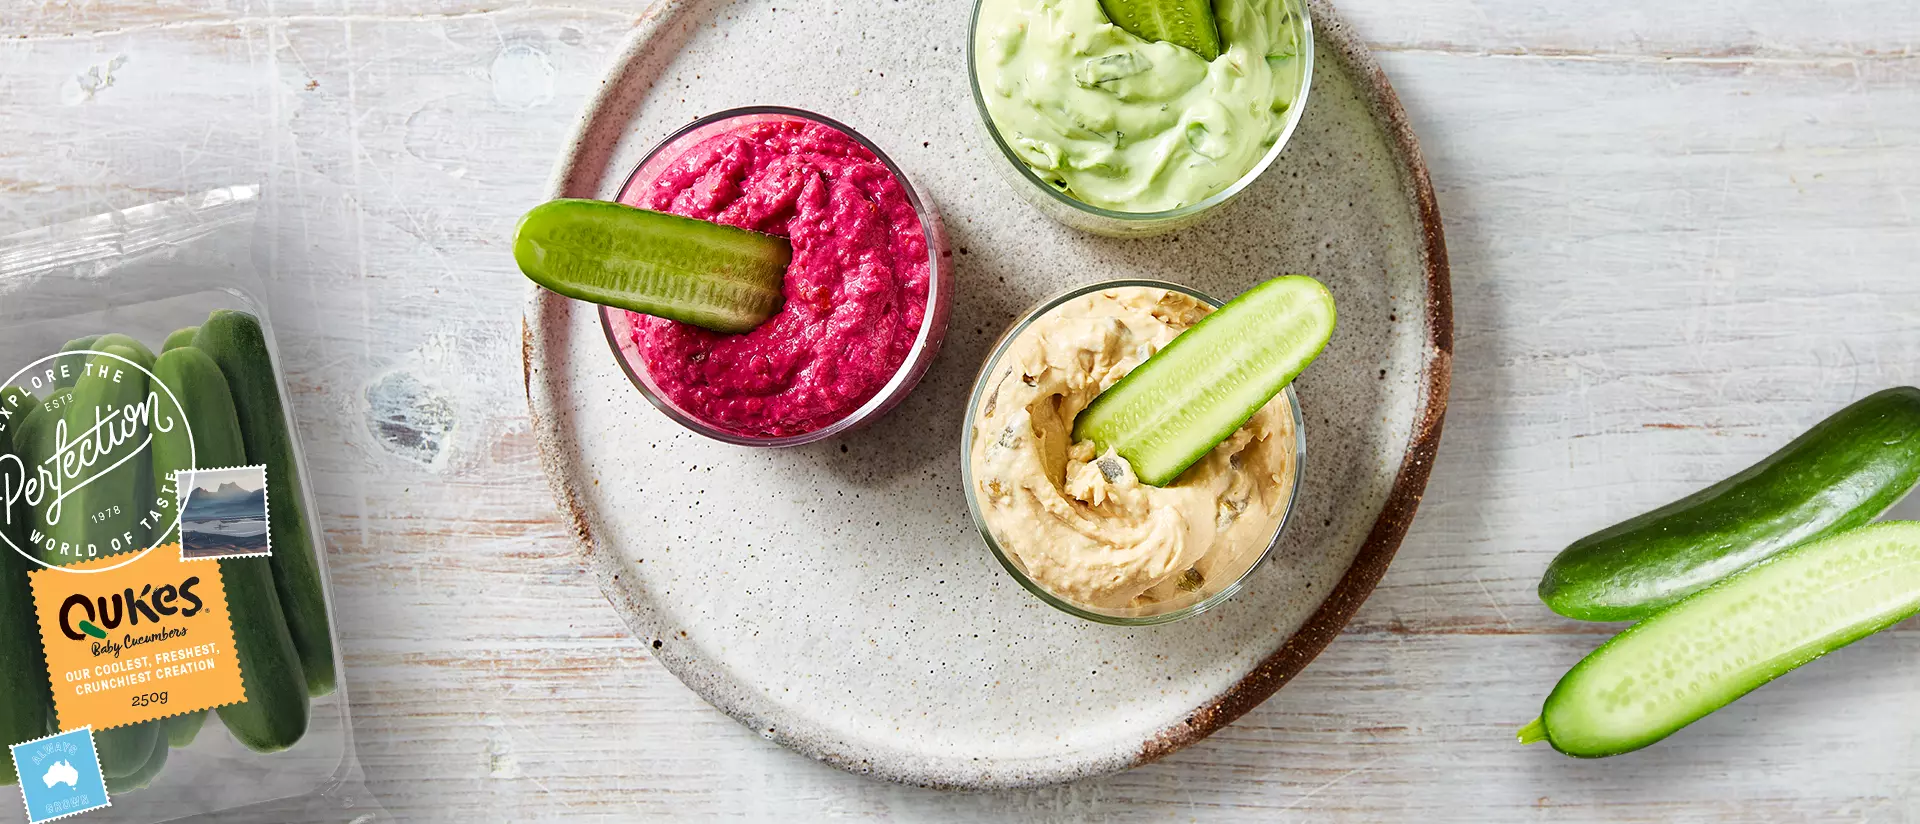 Qukes® with mixed dips Recipe